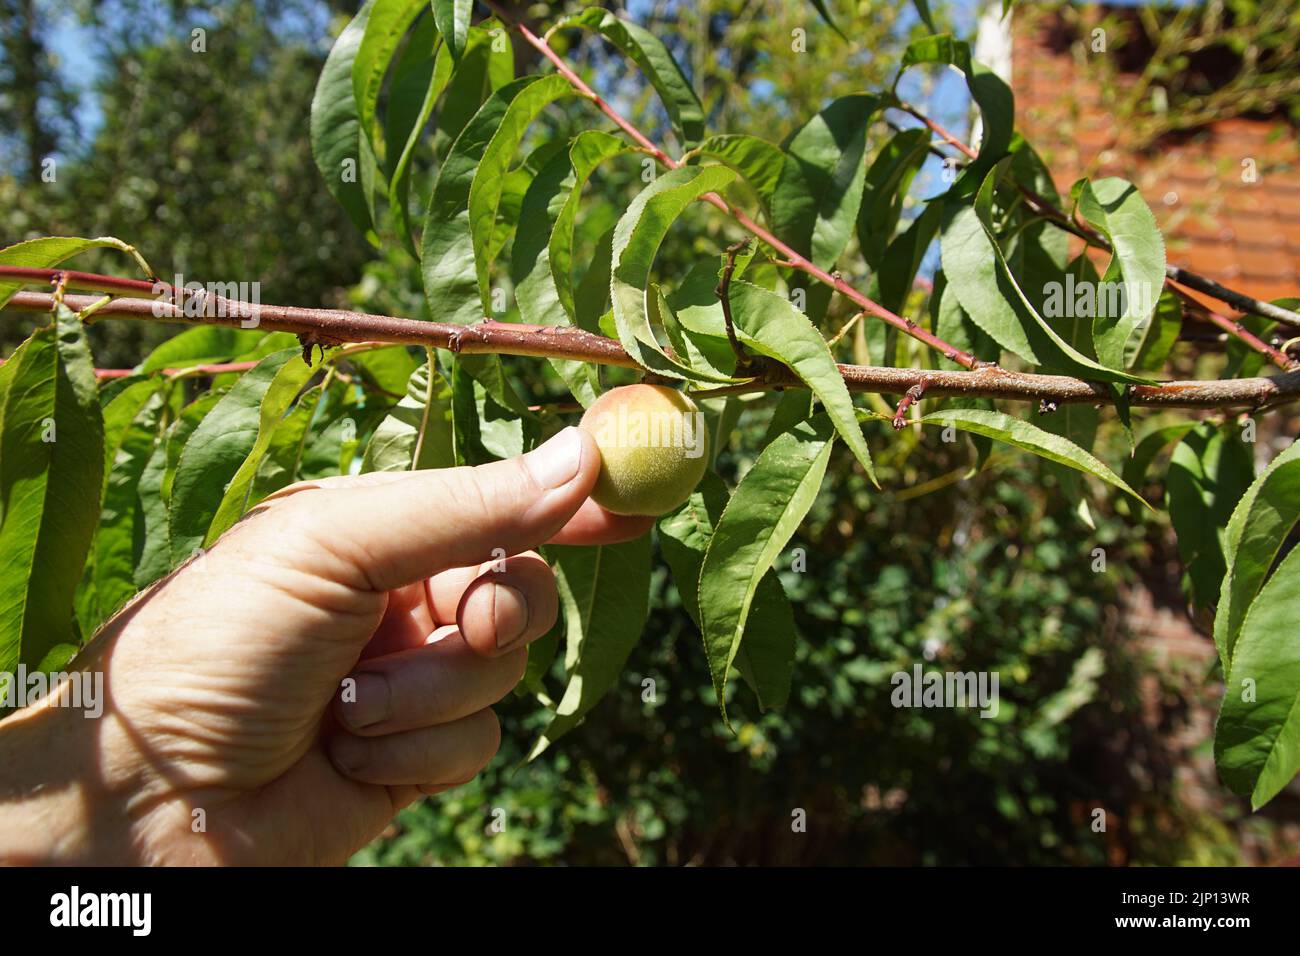 Hand, fingers at a peach in the peachtree, Prunus persica Melred. Picking peach, Dutch garden. Summer, August. Stock Photo